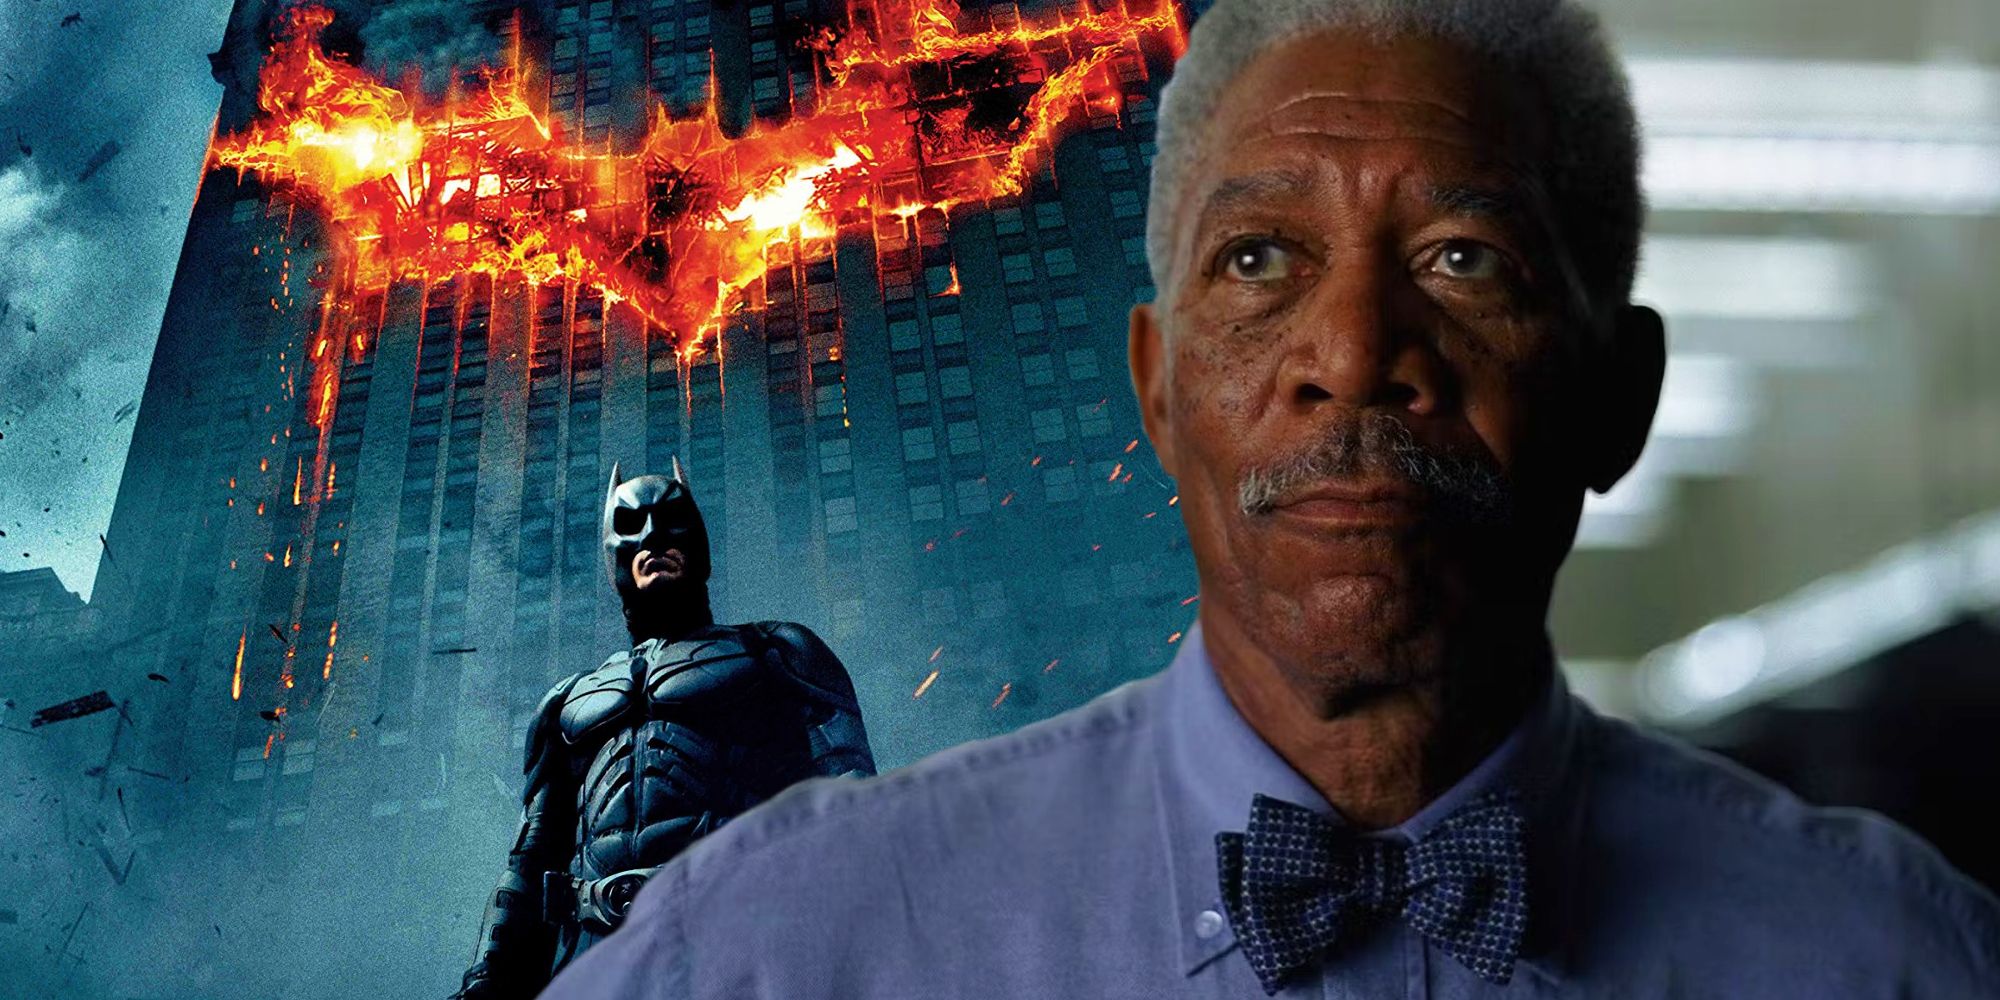 Christian Bale's Batman in the poster for The Dark Knight next to Morgan Freeman smirking as Lucius Fox 